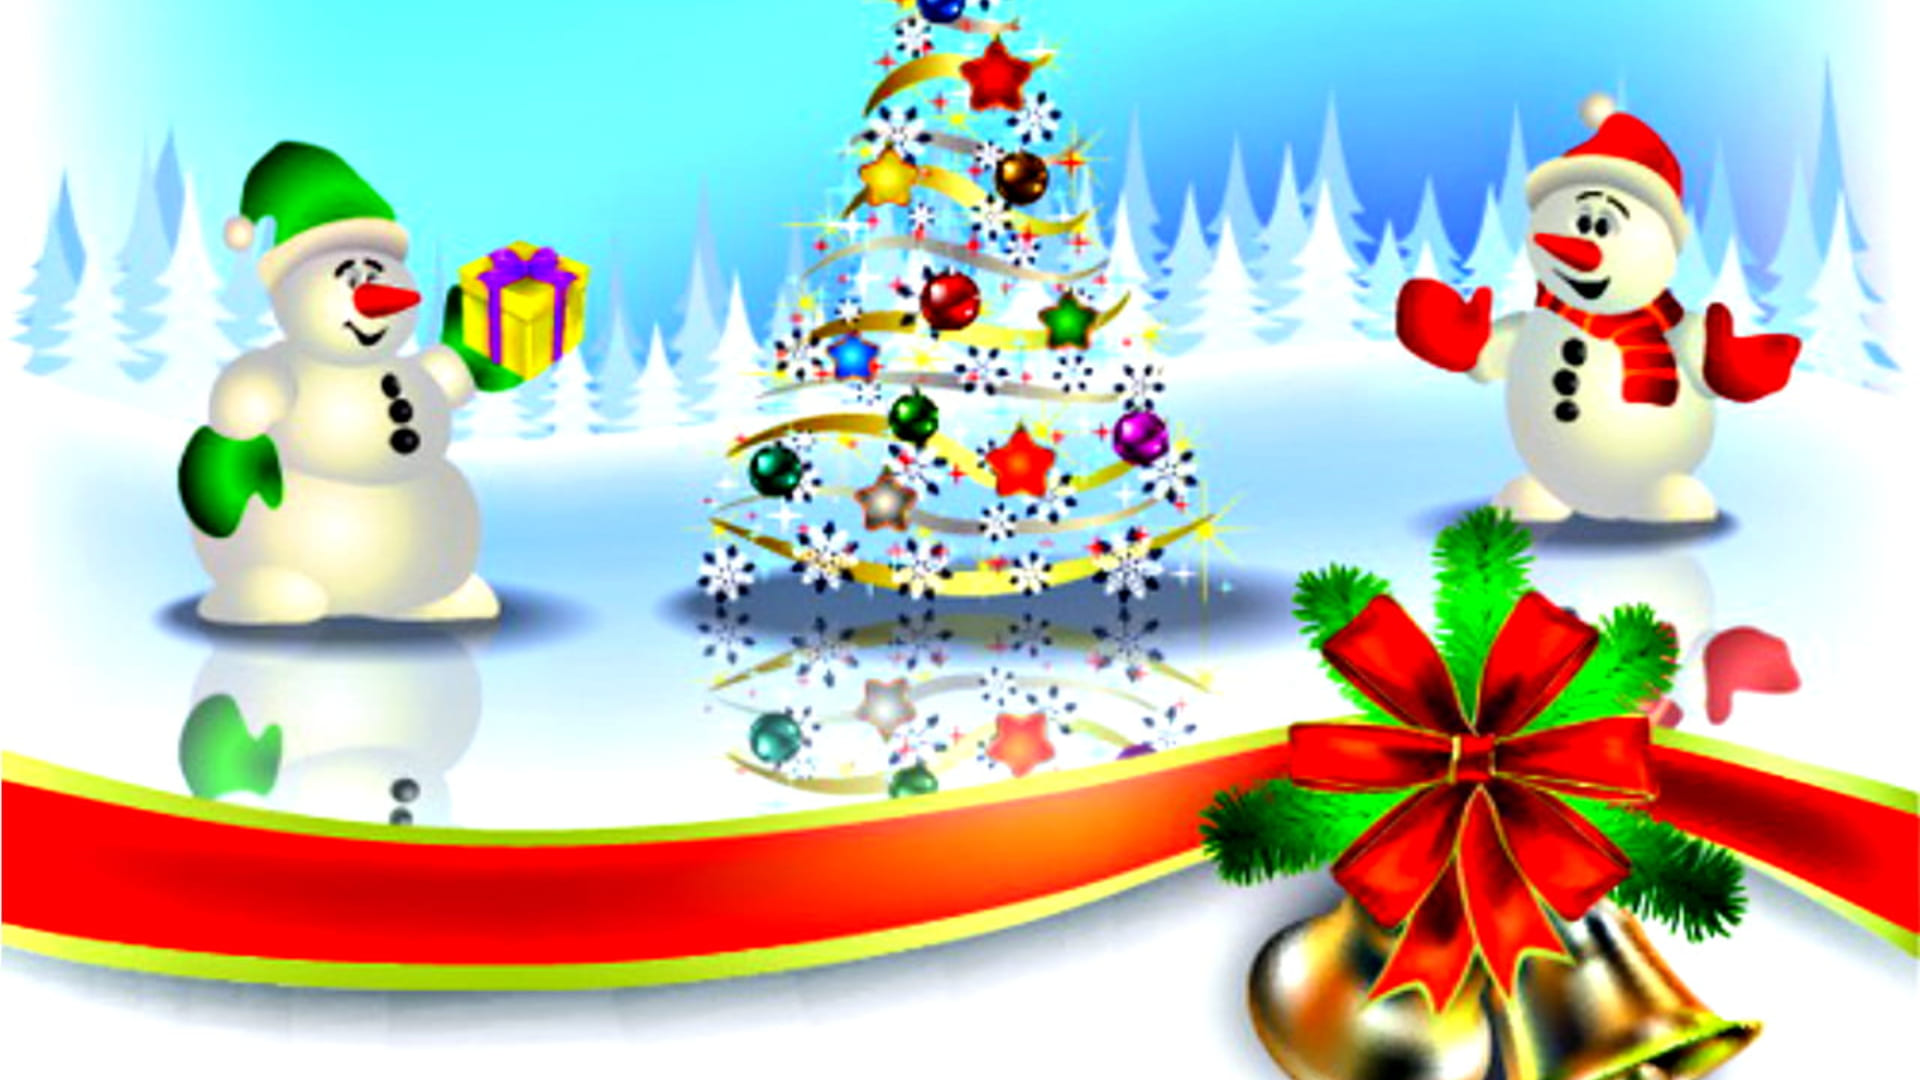 Cool 3D Christmas Wallpapers